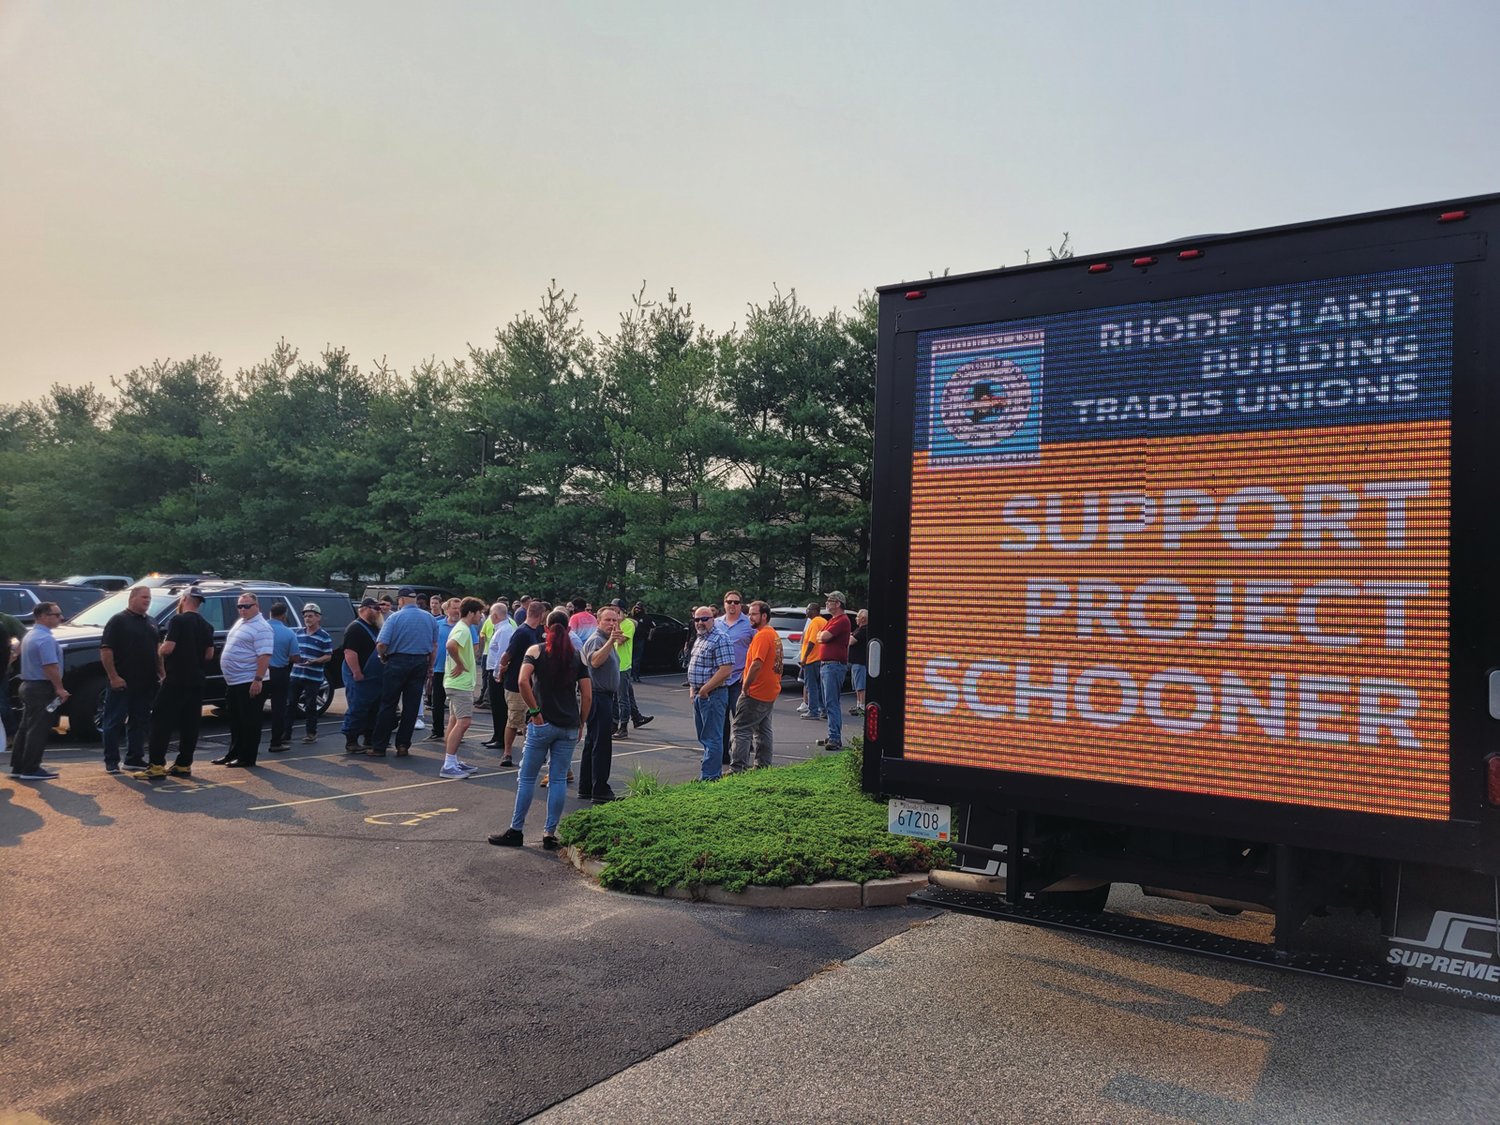 LOCAL UNION JOBS: More than 100 members and leaders of local trade unions attended the public hearing Tuesday, voicing support for the proposed six-story retail distribution facility. The unions hope construction of the facility will provide work for their members.